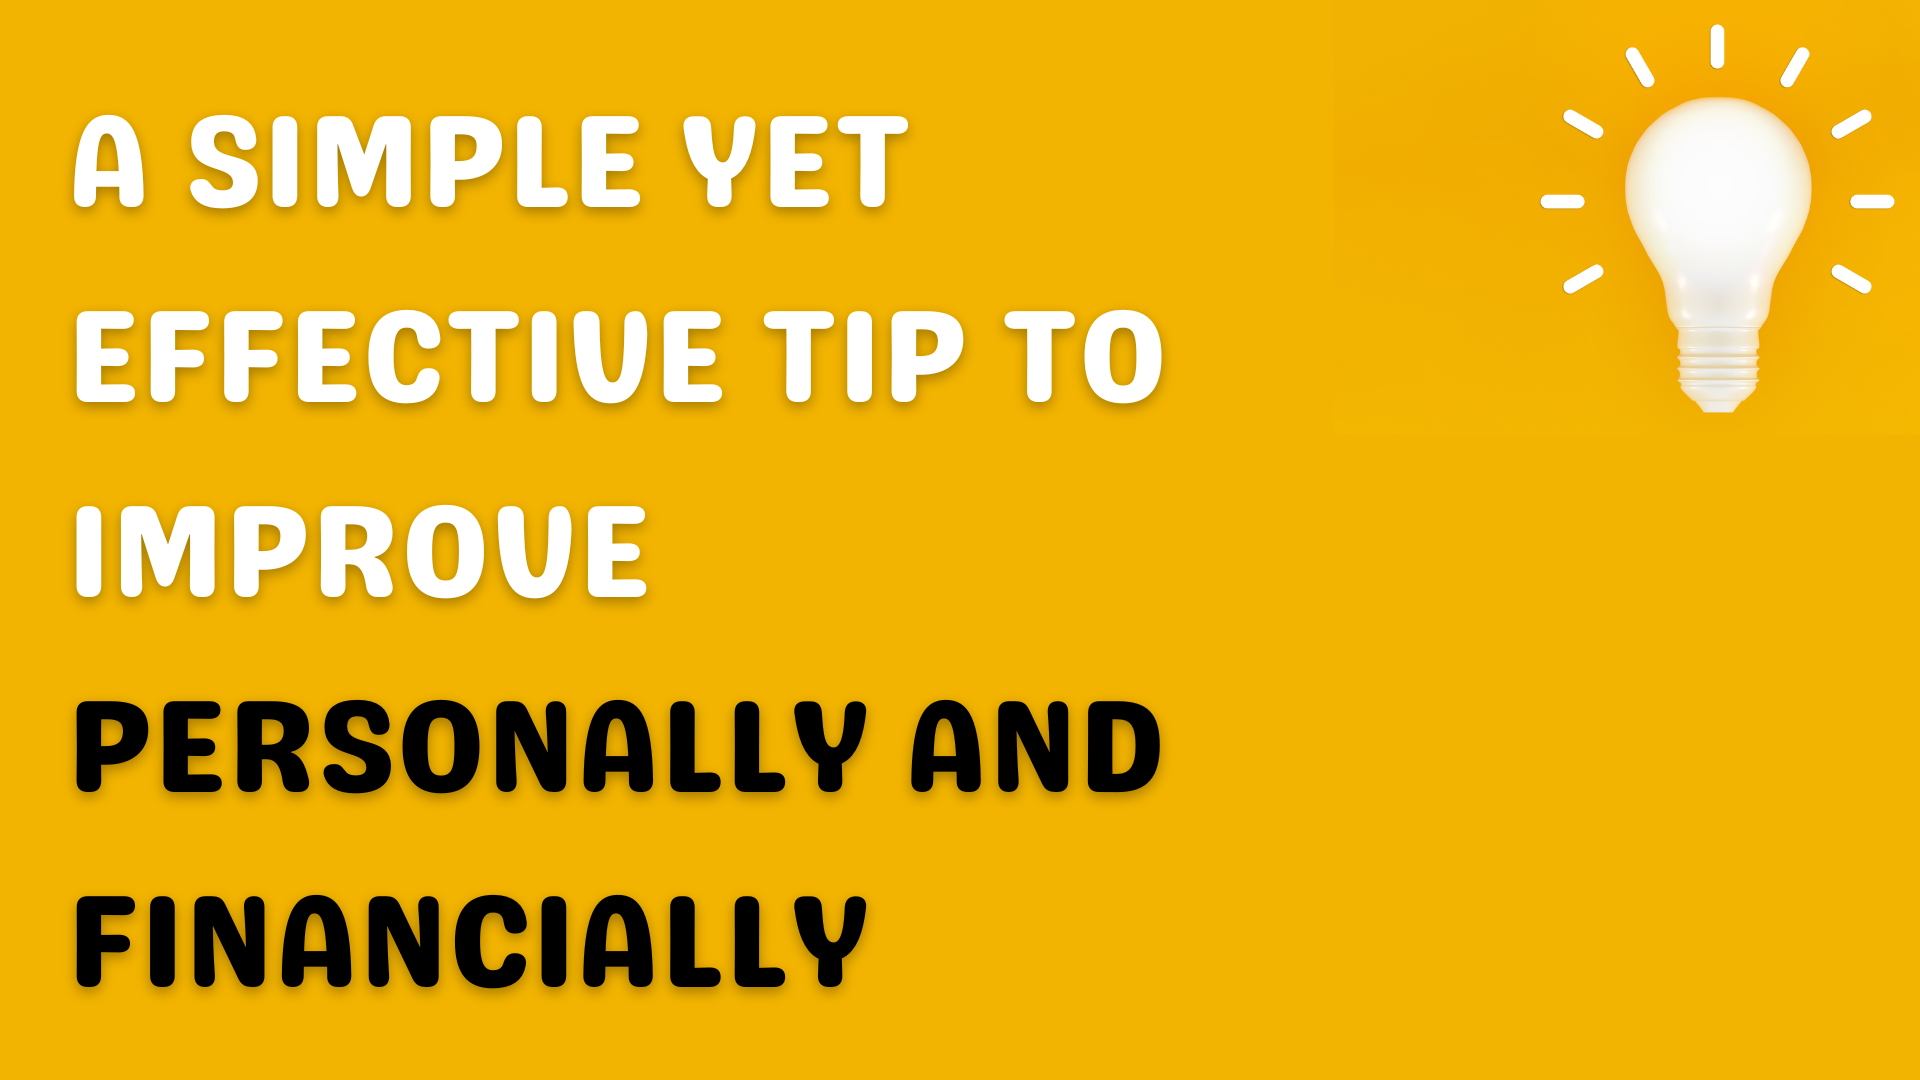 A Simple Yet Effective Tip To Improve Personally And Financially